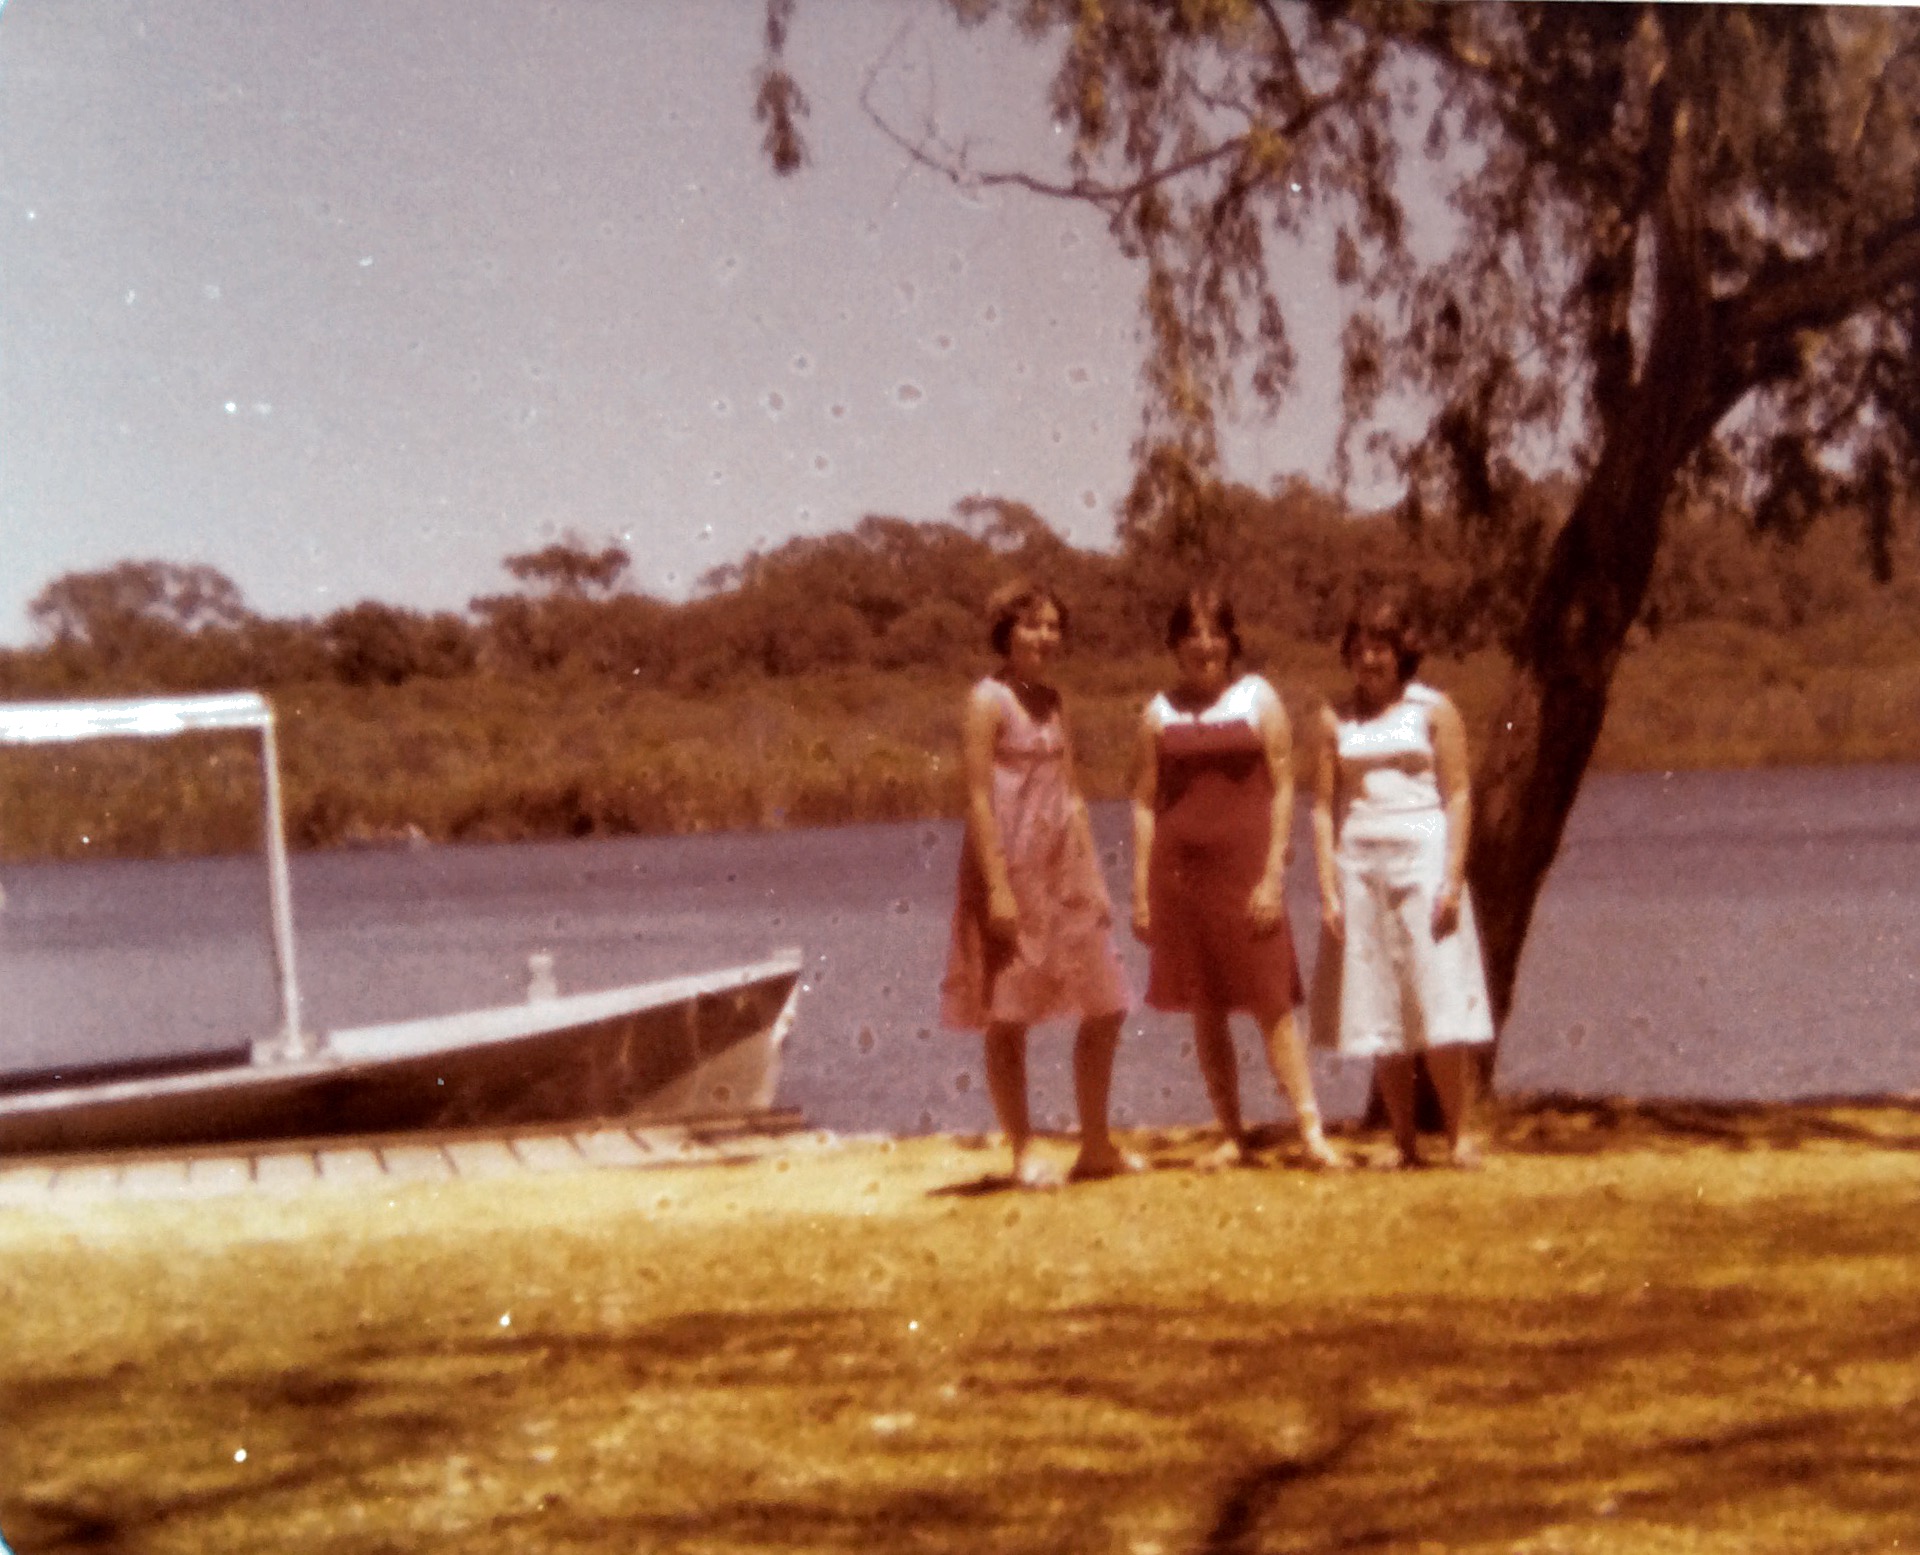 BOXIN DAY  1976 - IN 40 C -  YANCHEP NATIONAL PARK, PERTH - ILONA AND FRIENDS ....